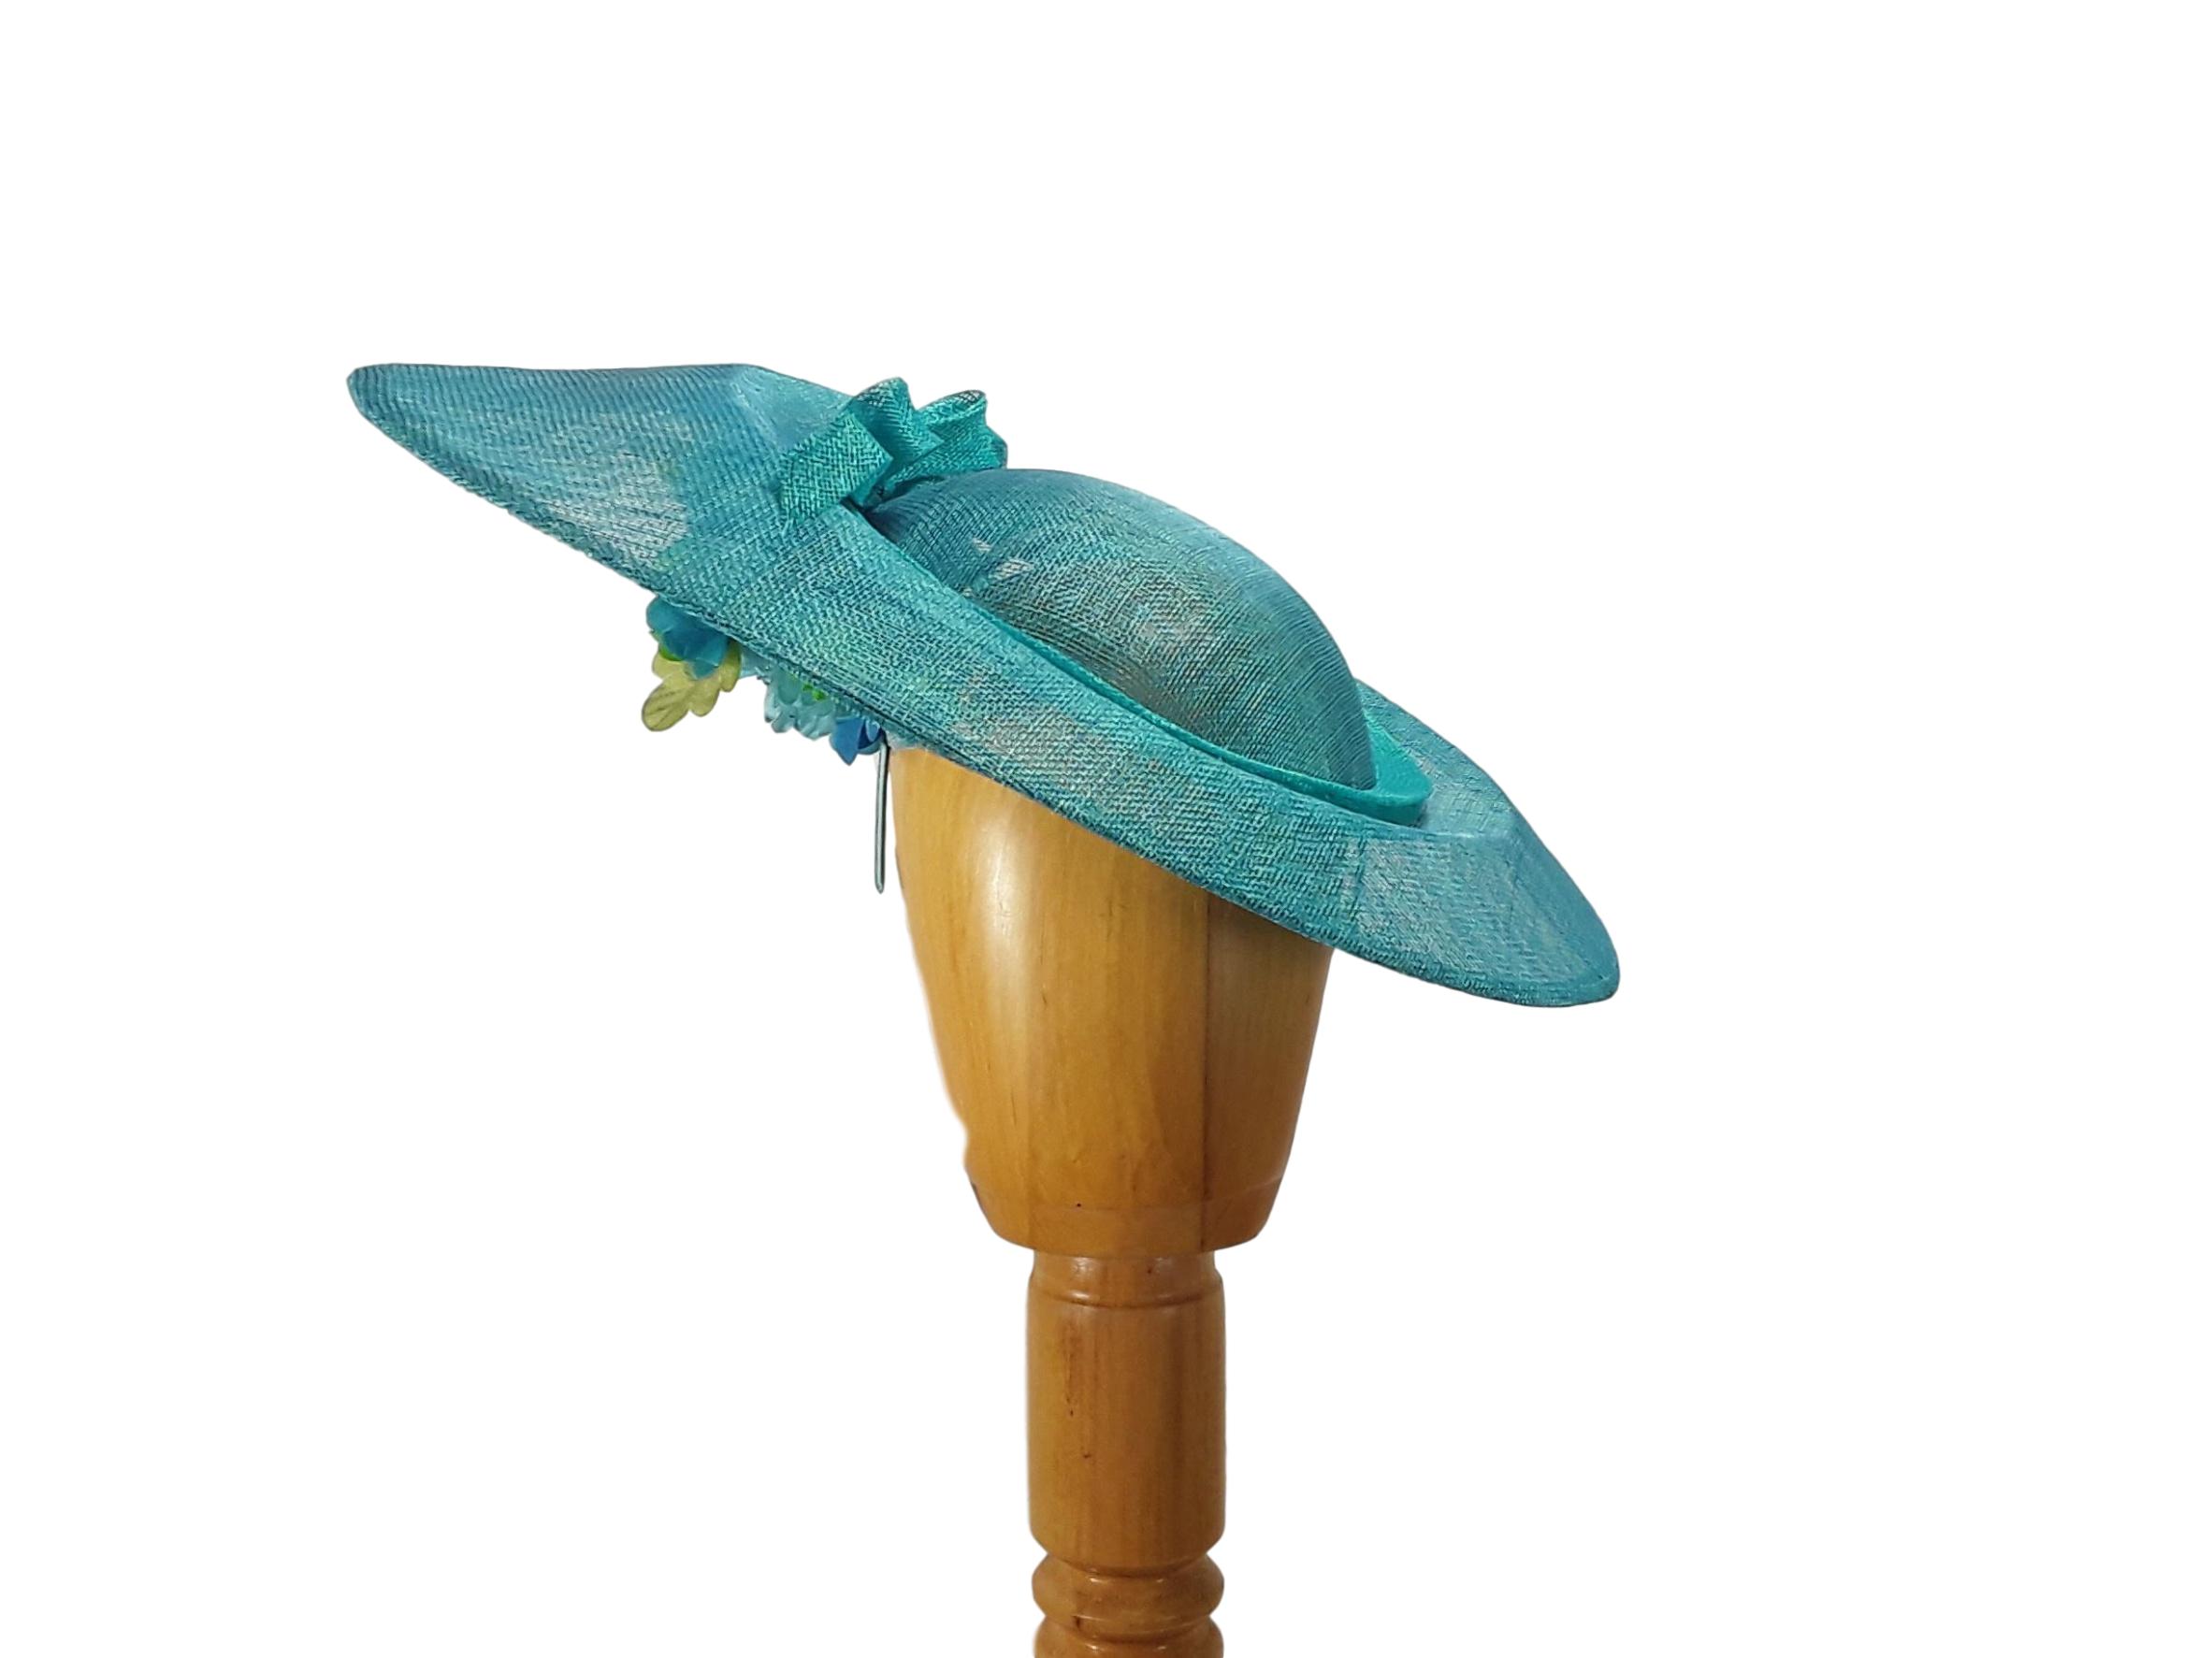 Teal pinokpok sinamay straw saucer hat with large teal and black windowpane  sinamay straw bow on headband